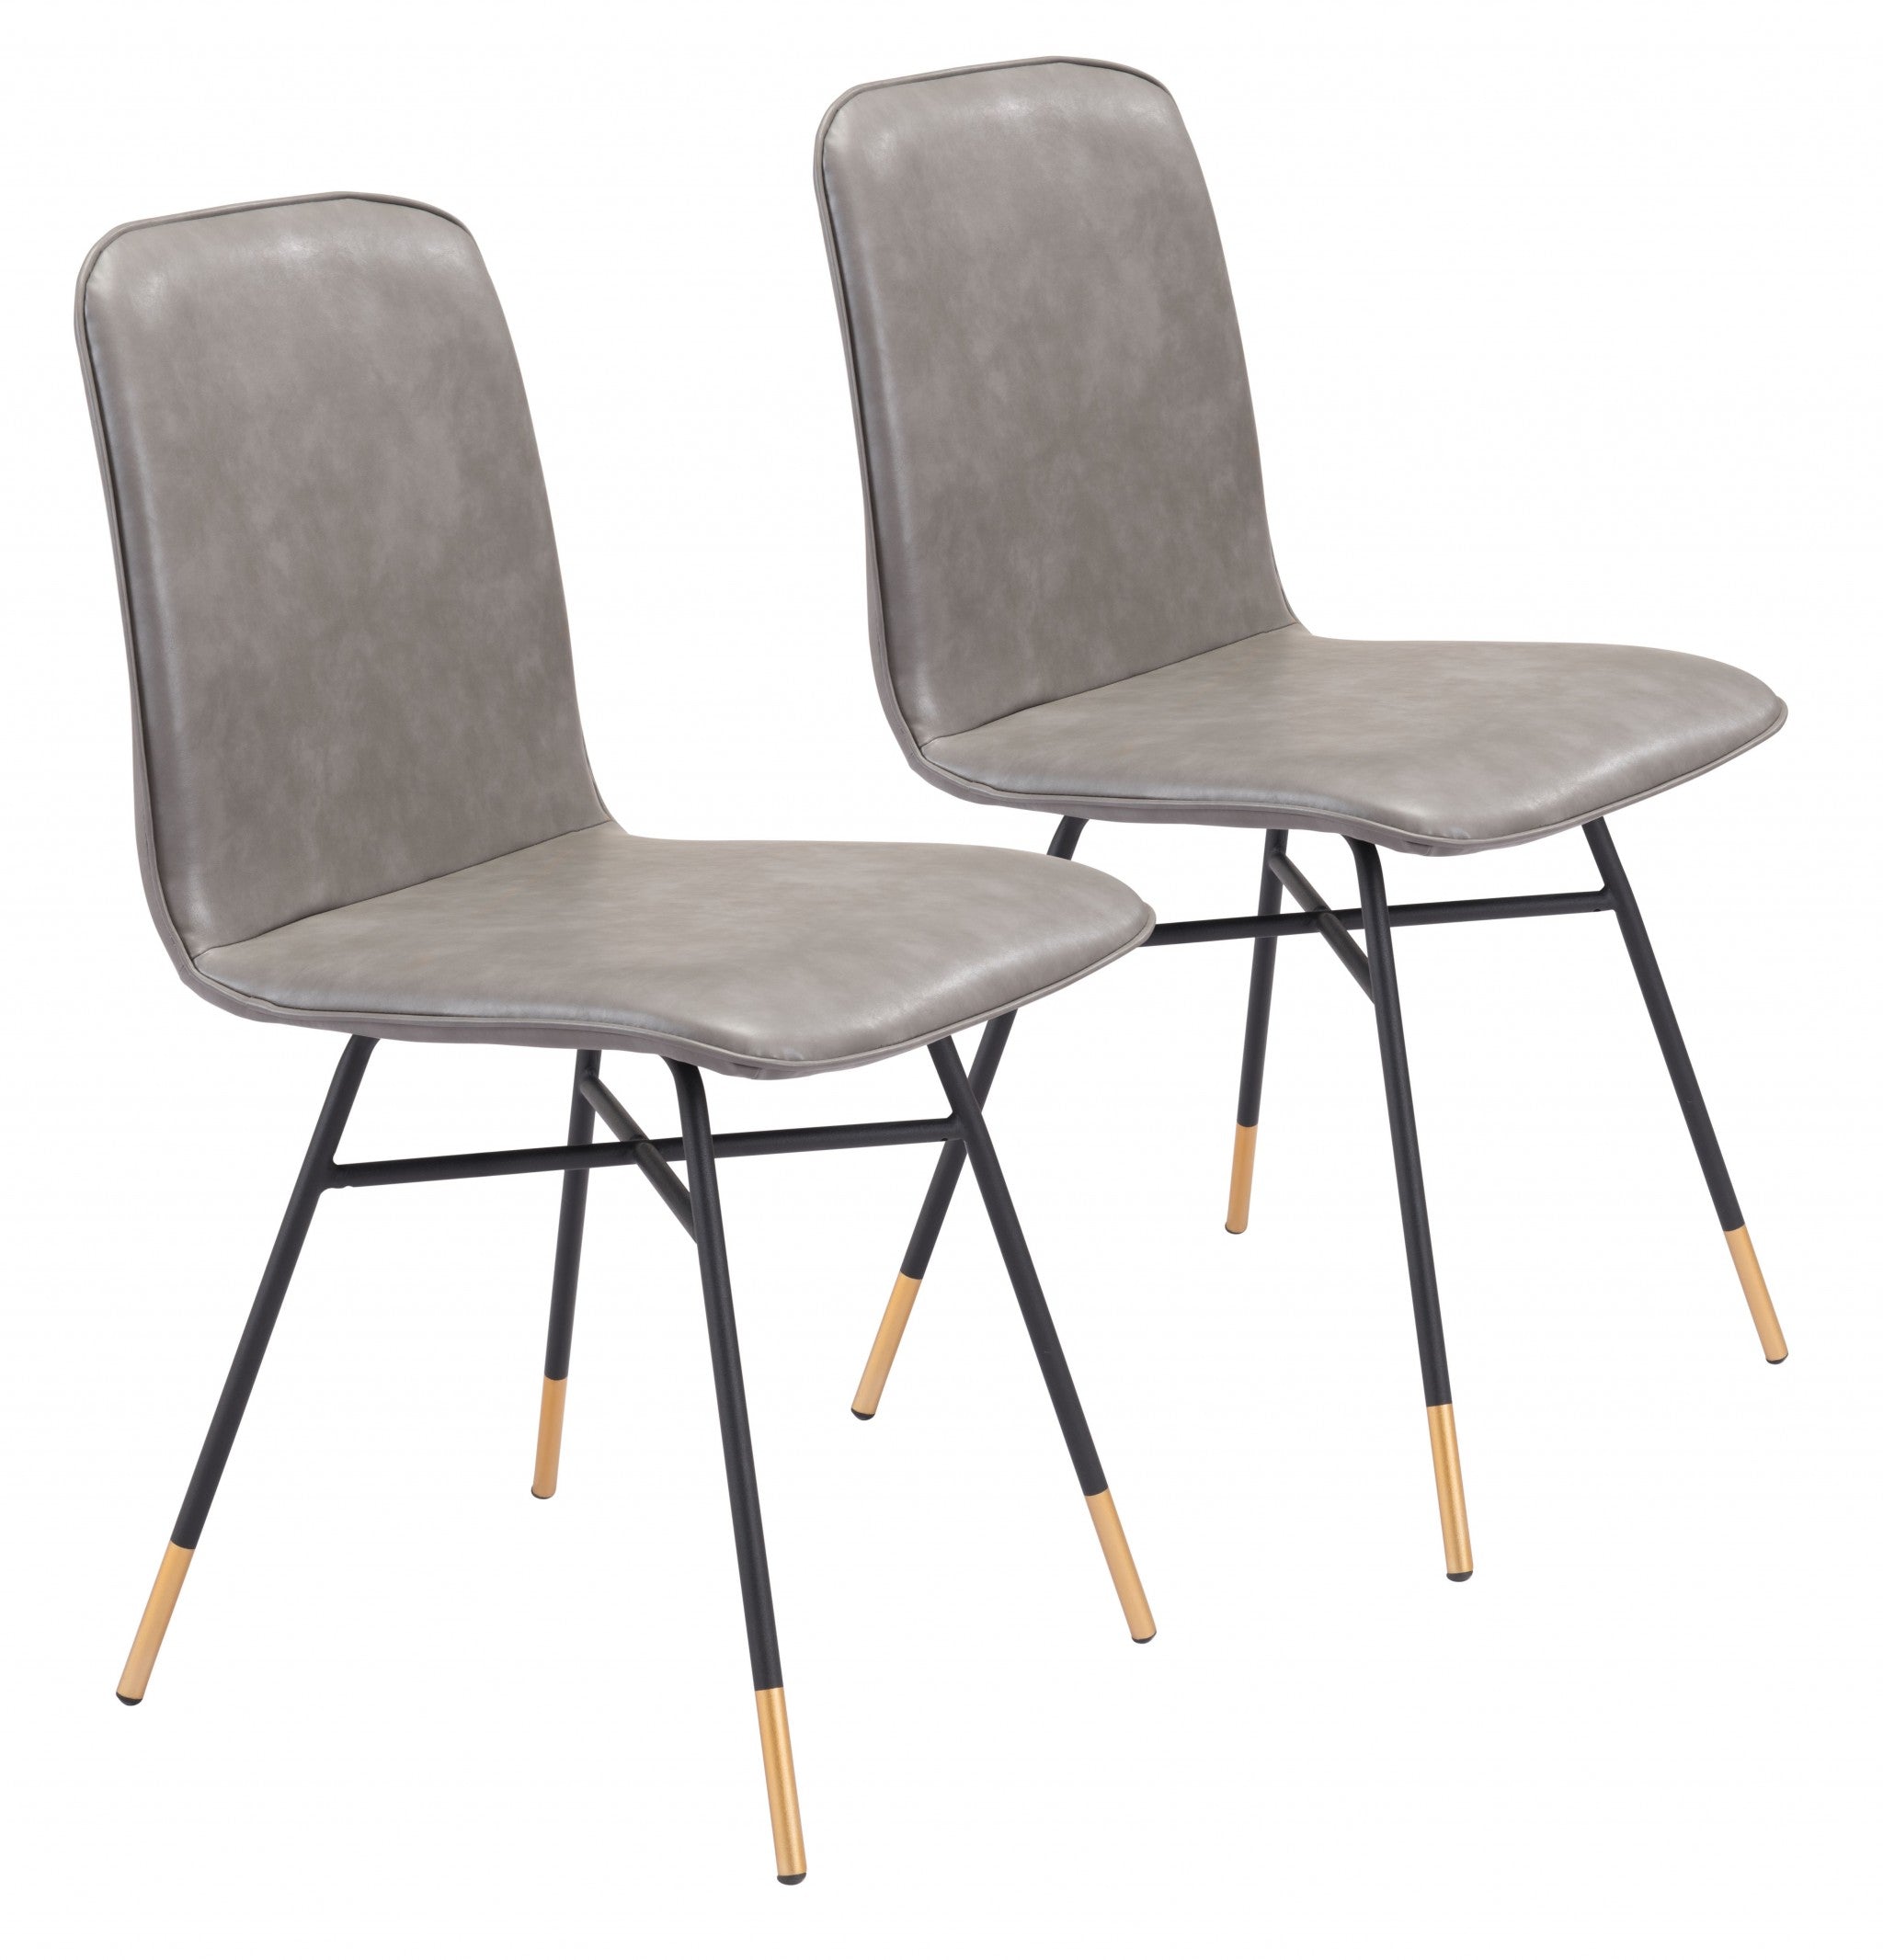 Set of Two Gray and Black Upholstered Faux Leather Dining Side Chairs